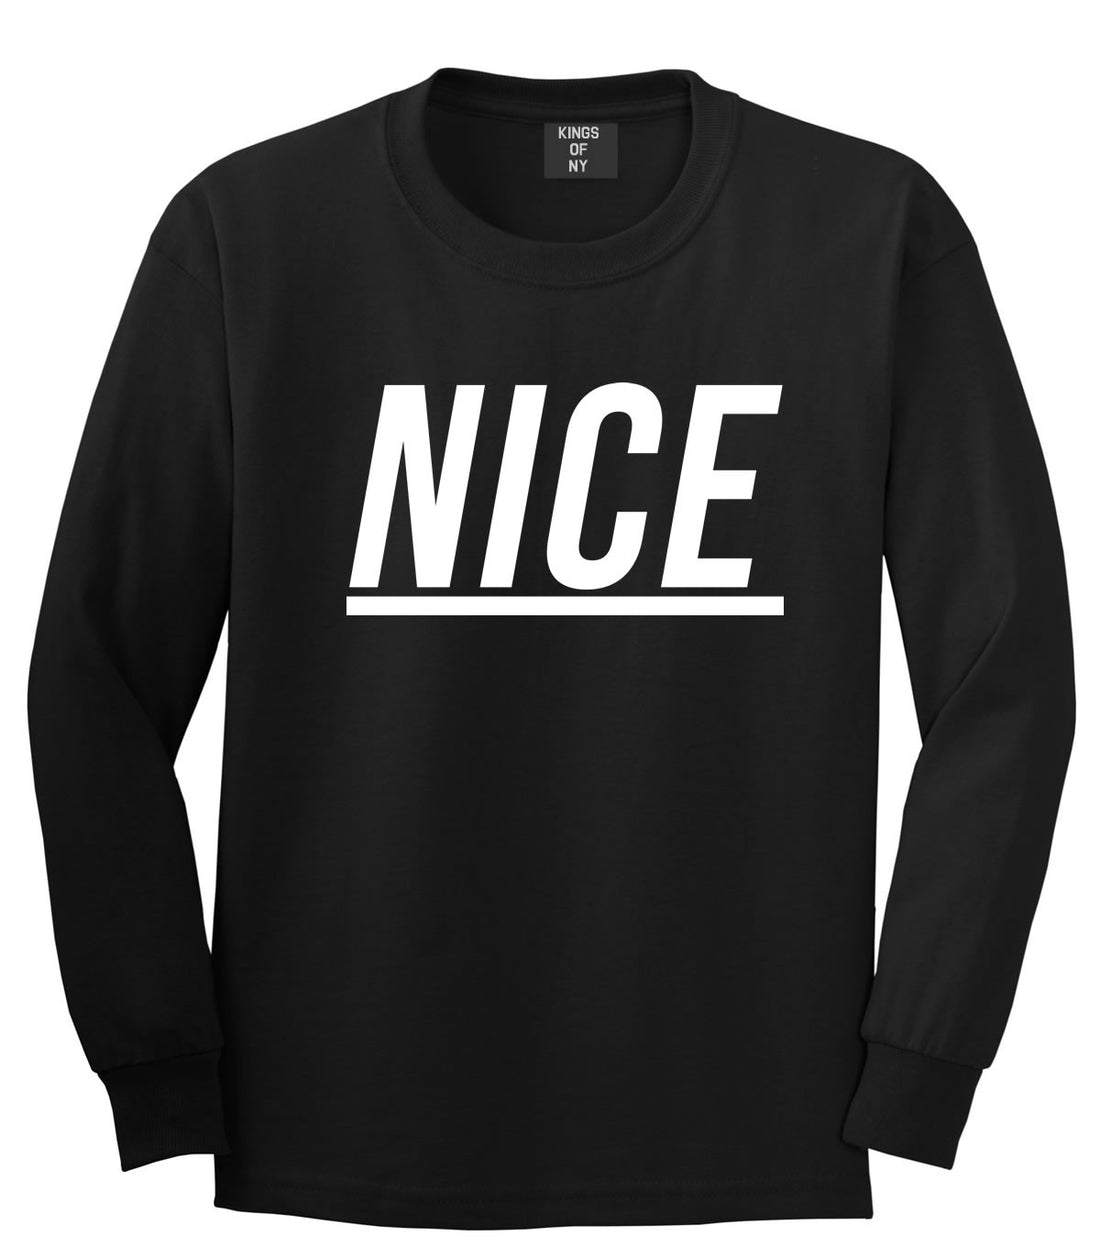 Nice Long Sleeve T-Shirt in Black by Kings Of NY